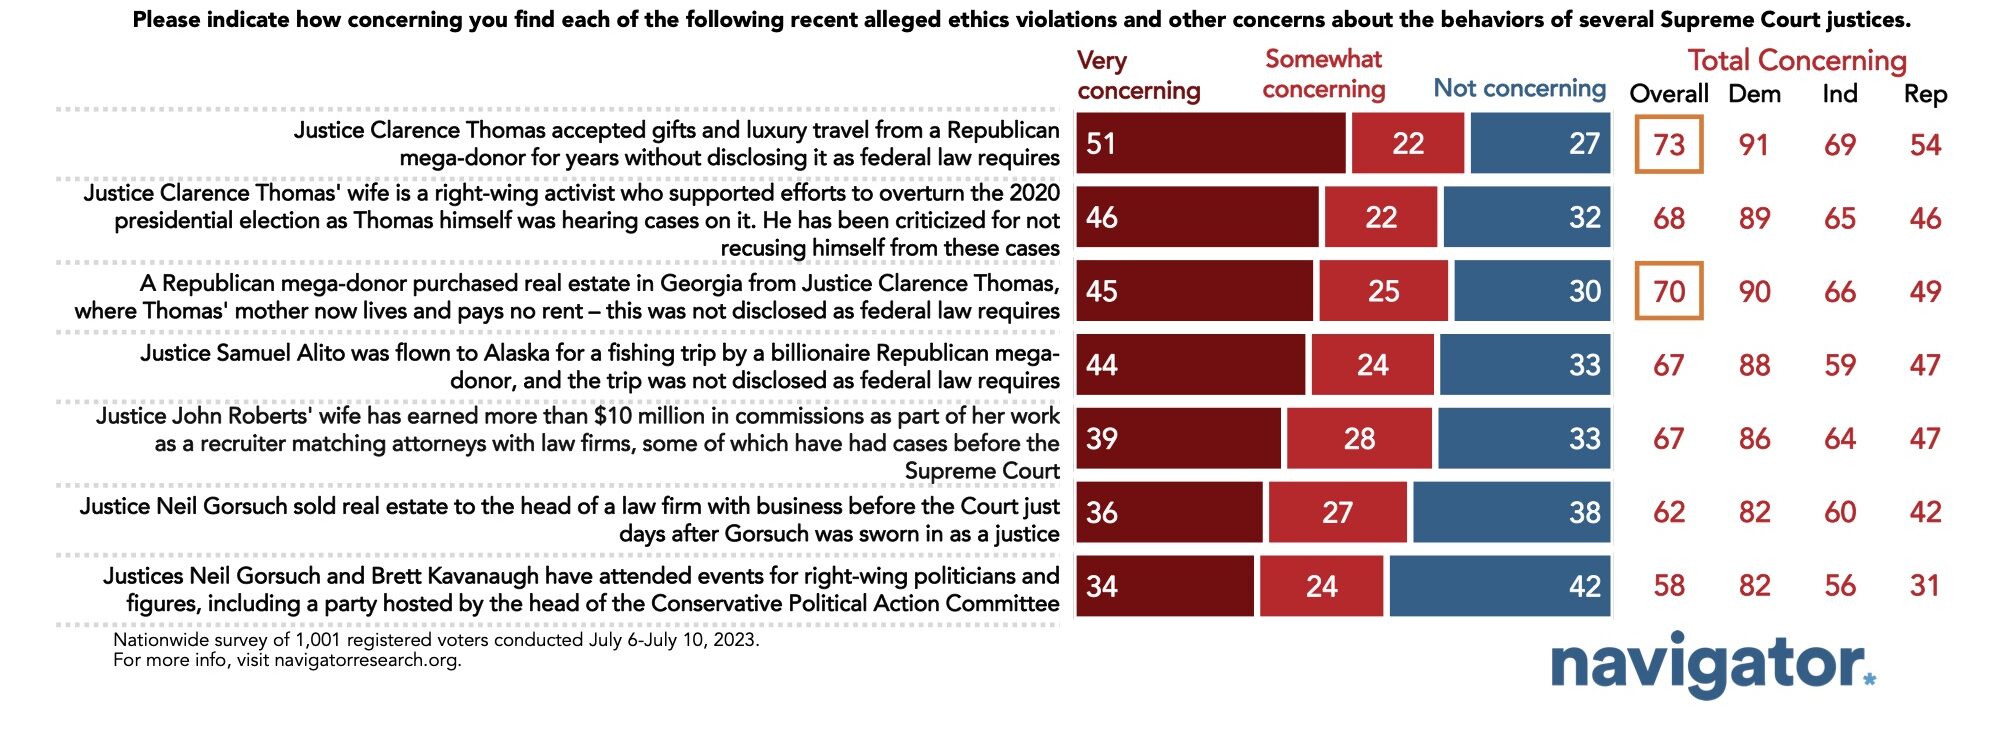 Survey results to the following prompt: Please indicate how concerning you find each of the following recent alleged ethics violations and other concerns about the behaviors of several Supreme Court justices.